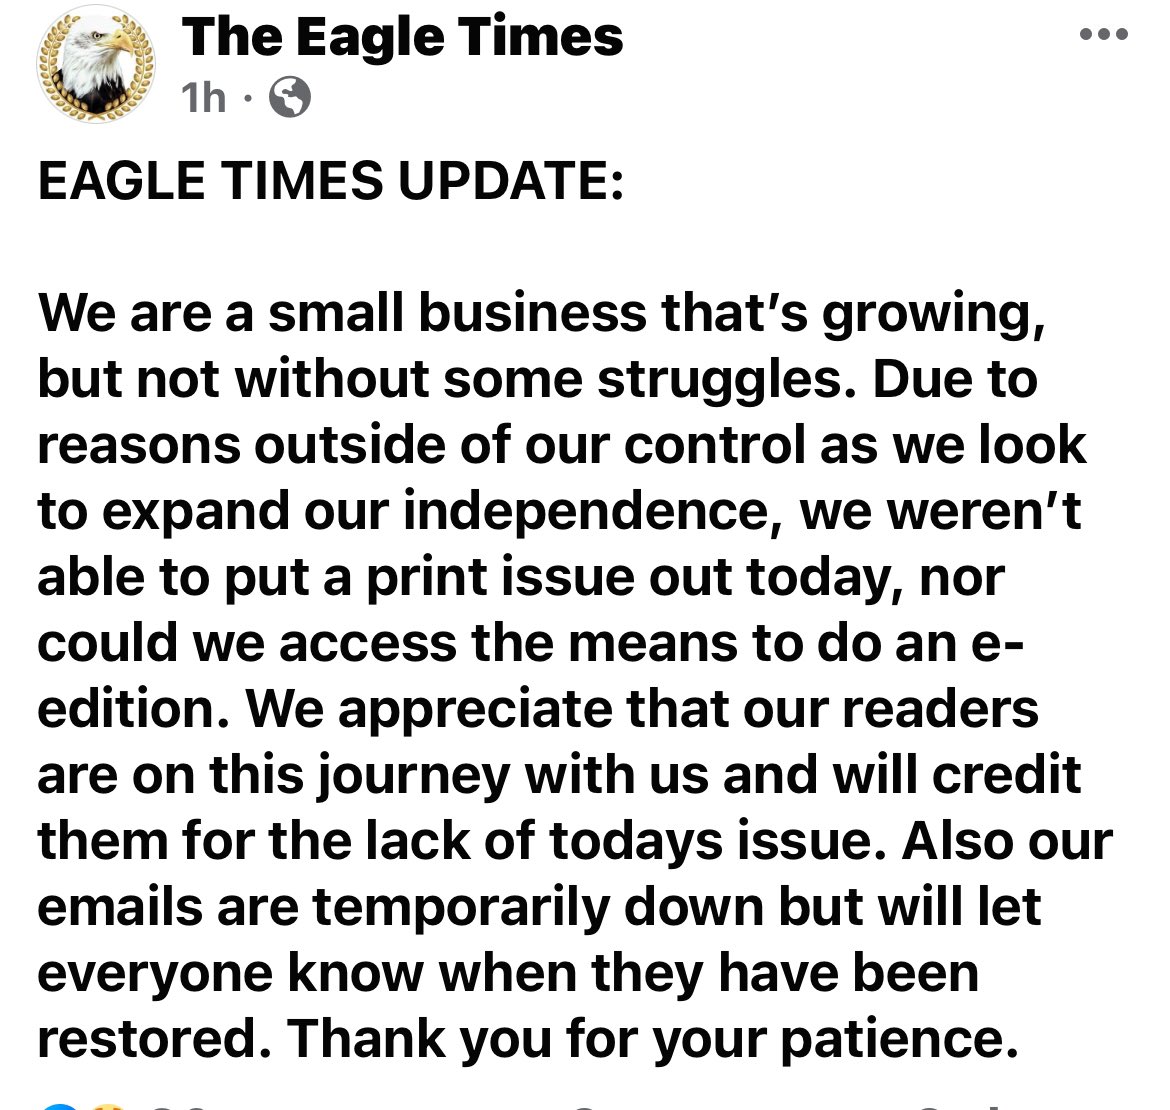 More troubling news from a local newspaper. The Eagle Times of Claremont just posted this on Facebook.